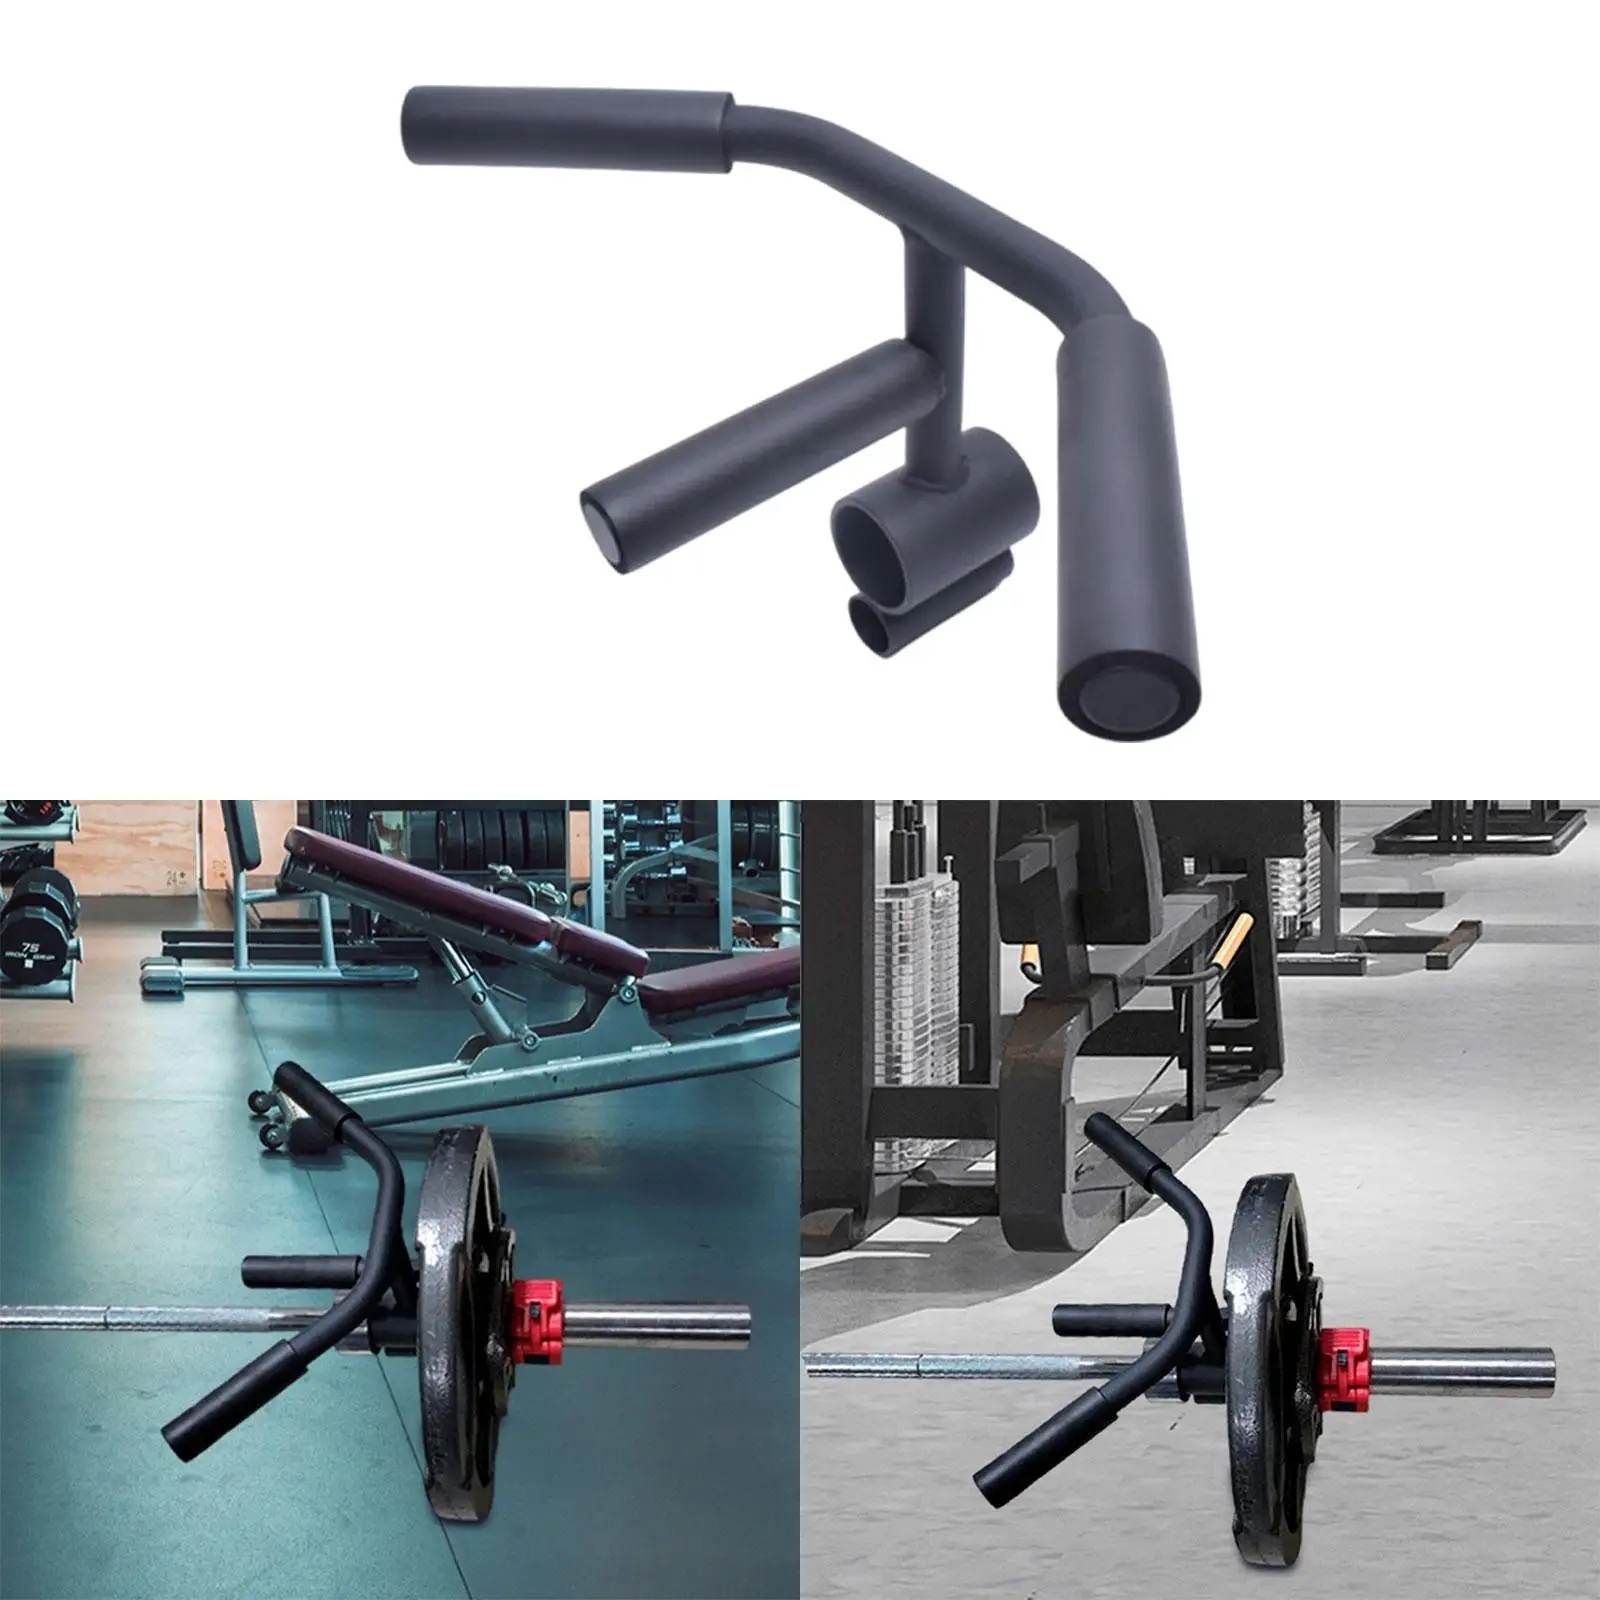 Lightweight T Bar Row Landmine Attachment Equipment Home Gym Easy to Install for Barbell Deadlift Triceps Strengthens Back